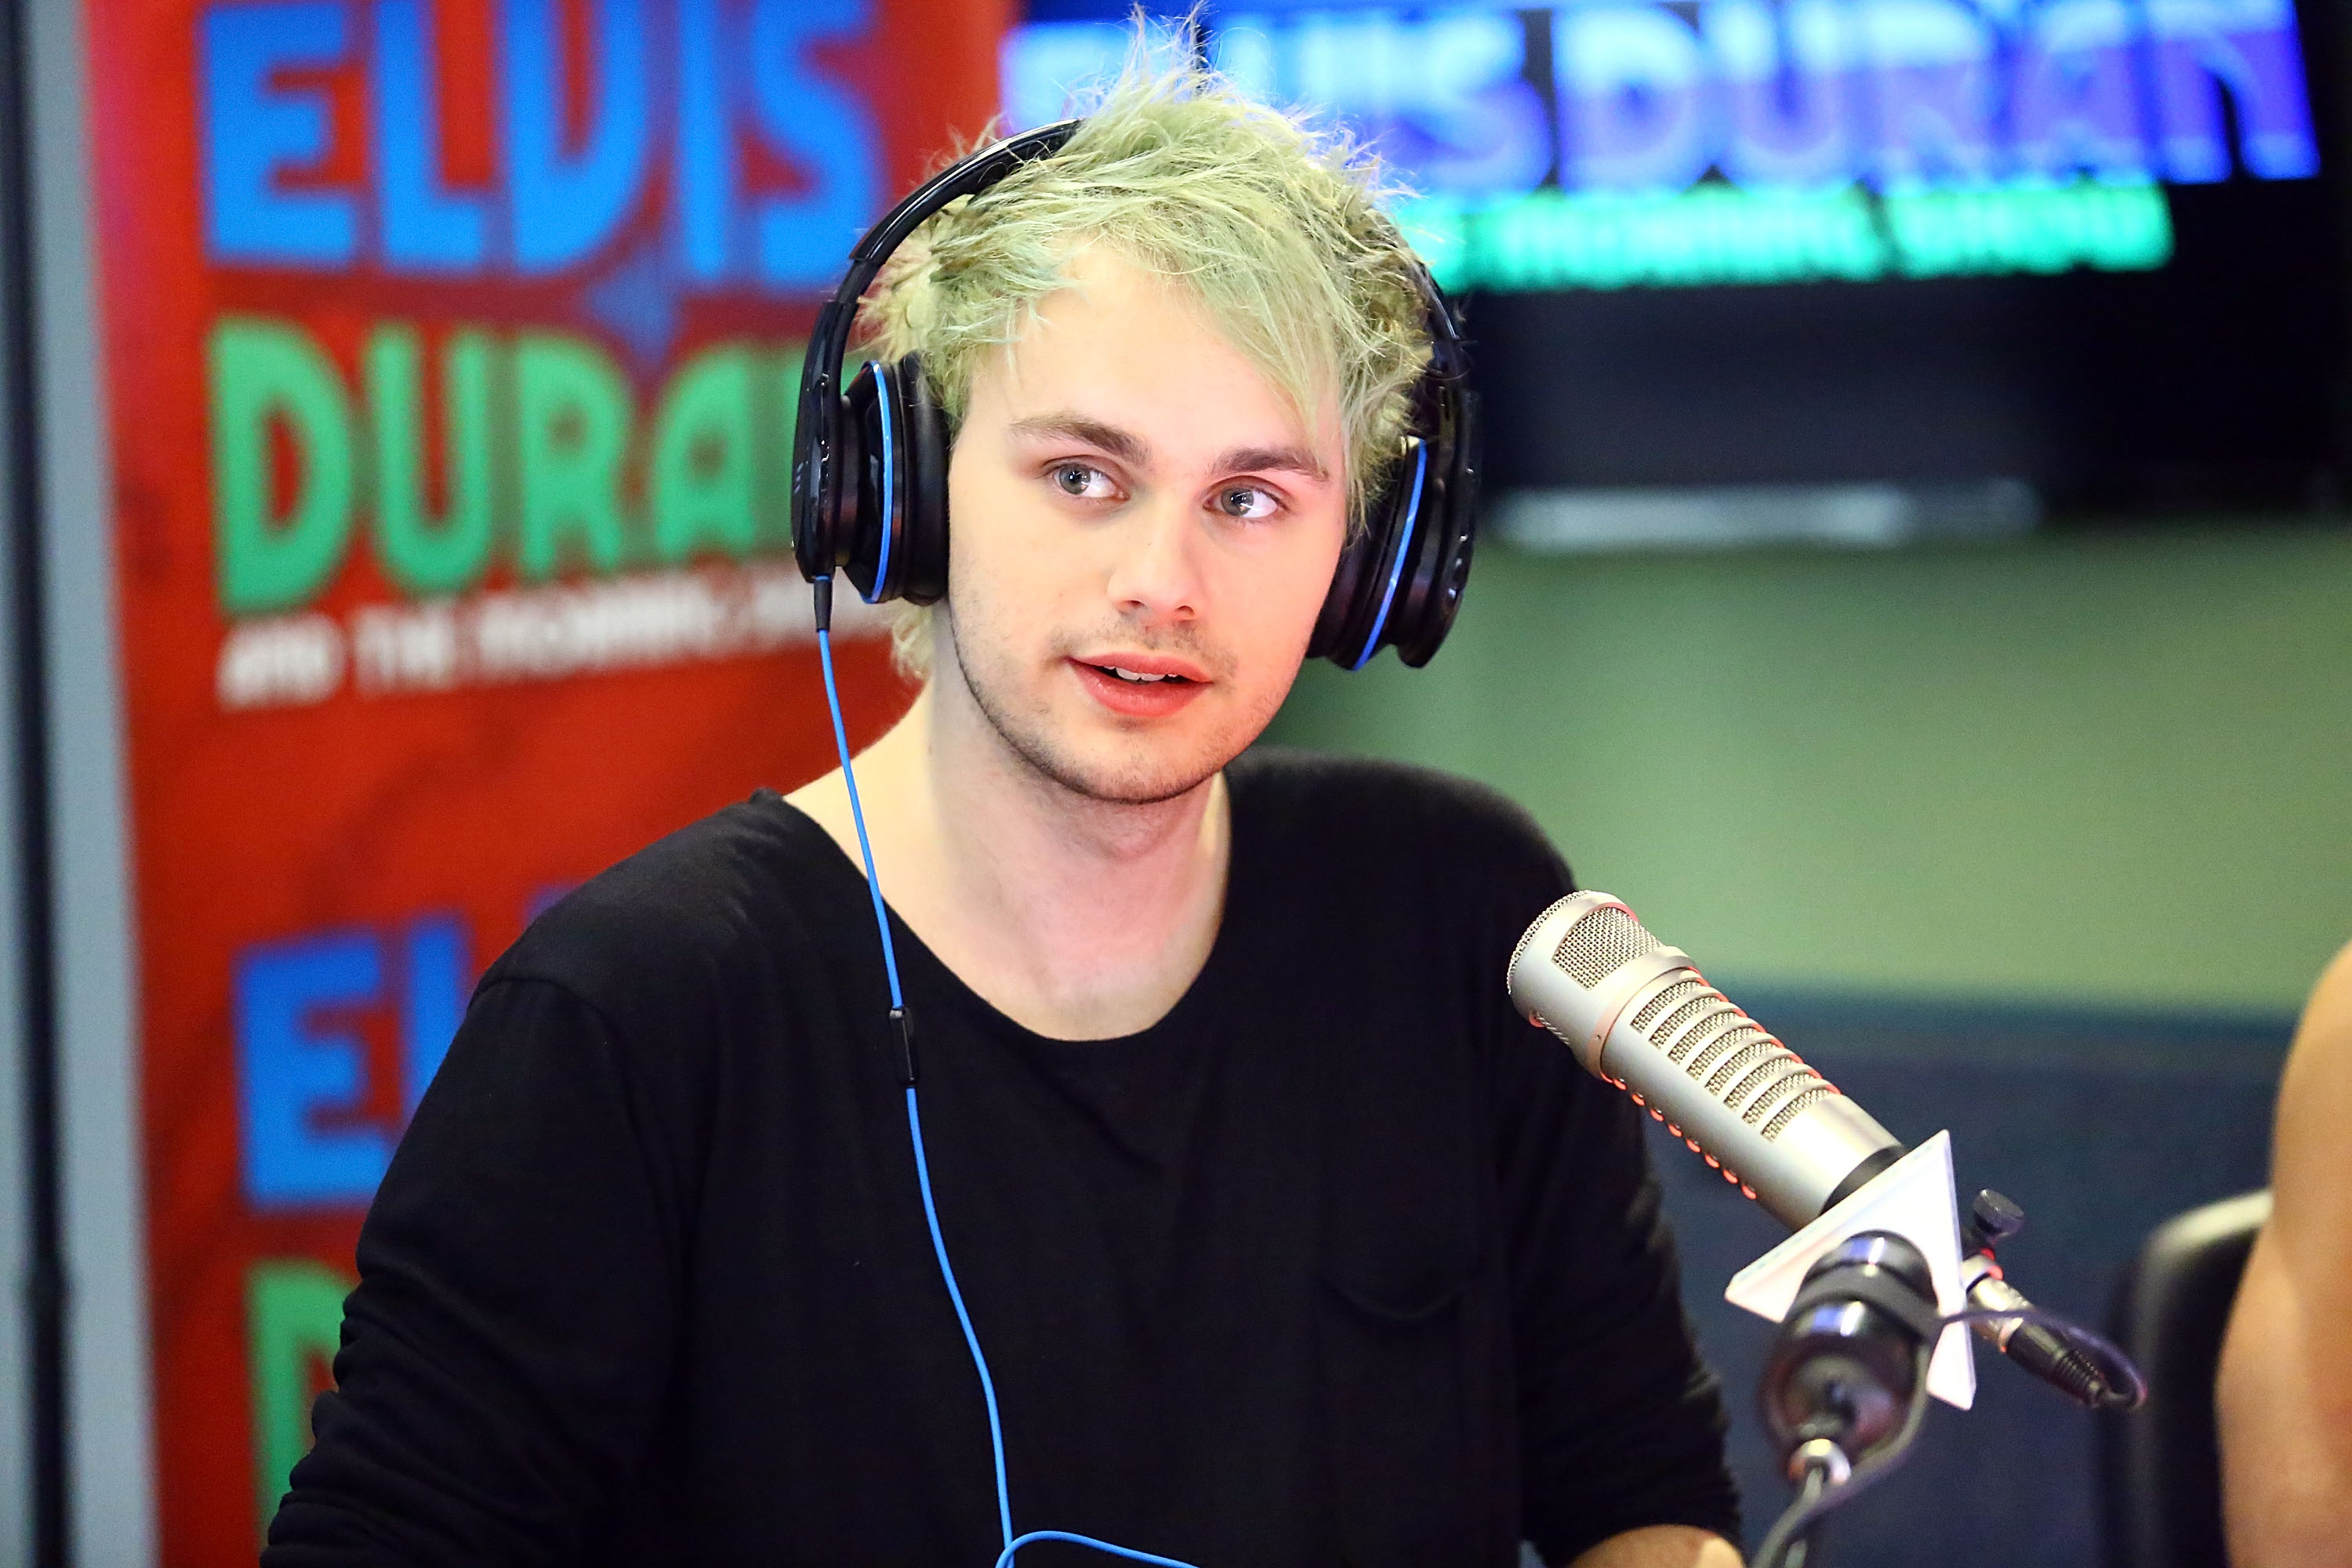 5SOS's Michael Clifford's Blue Hair Inspires Fans to Dye Their Own - wide 1